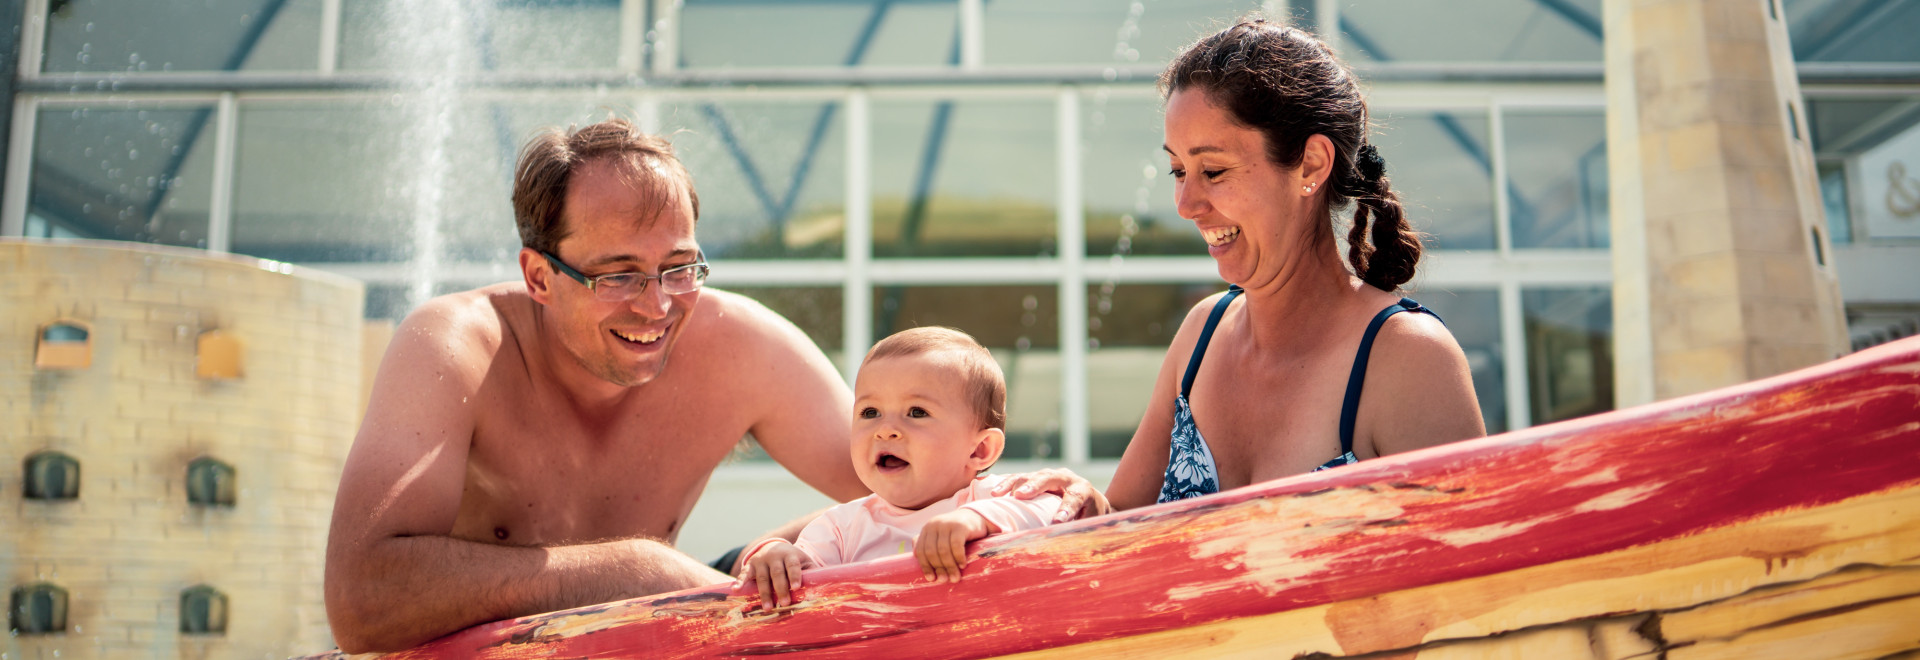 Holidays with baby | Couple with baby in paddling pool | First Holiday Offer for 3